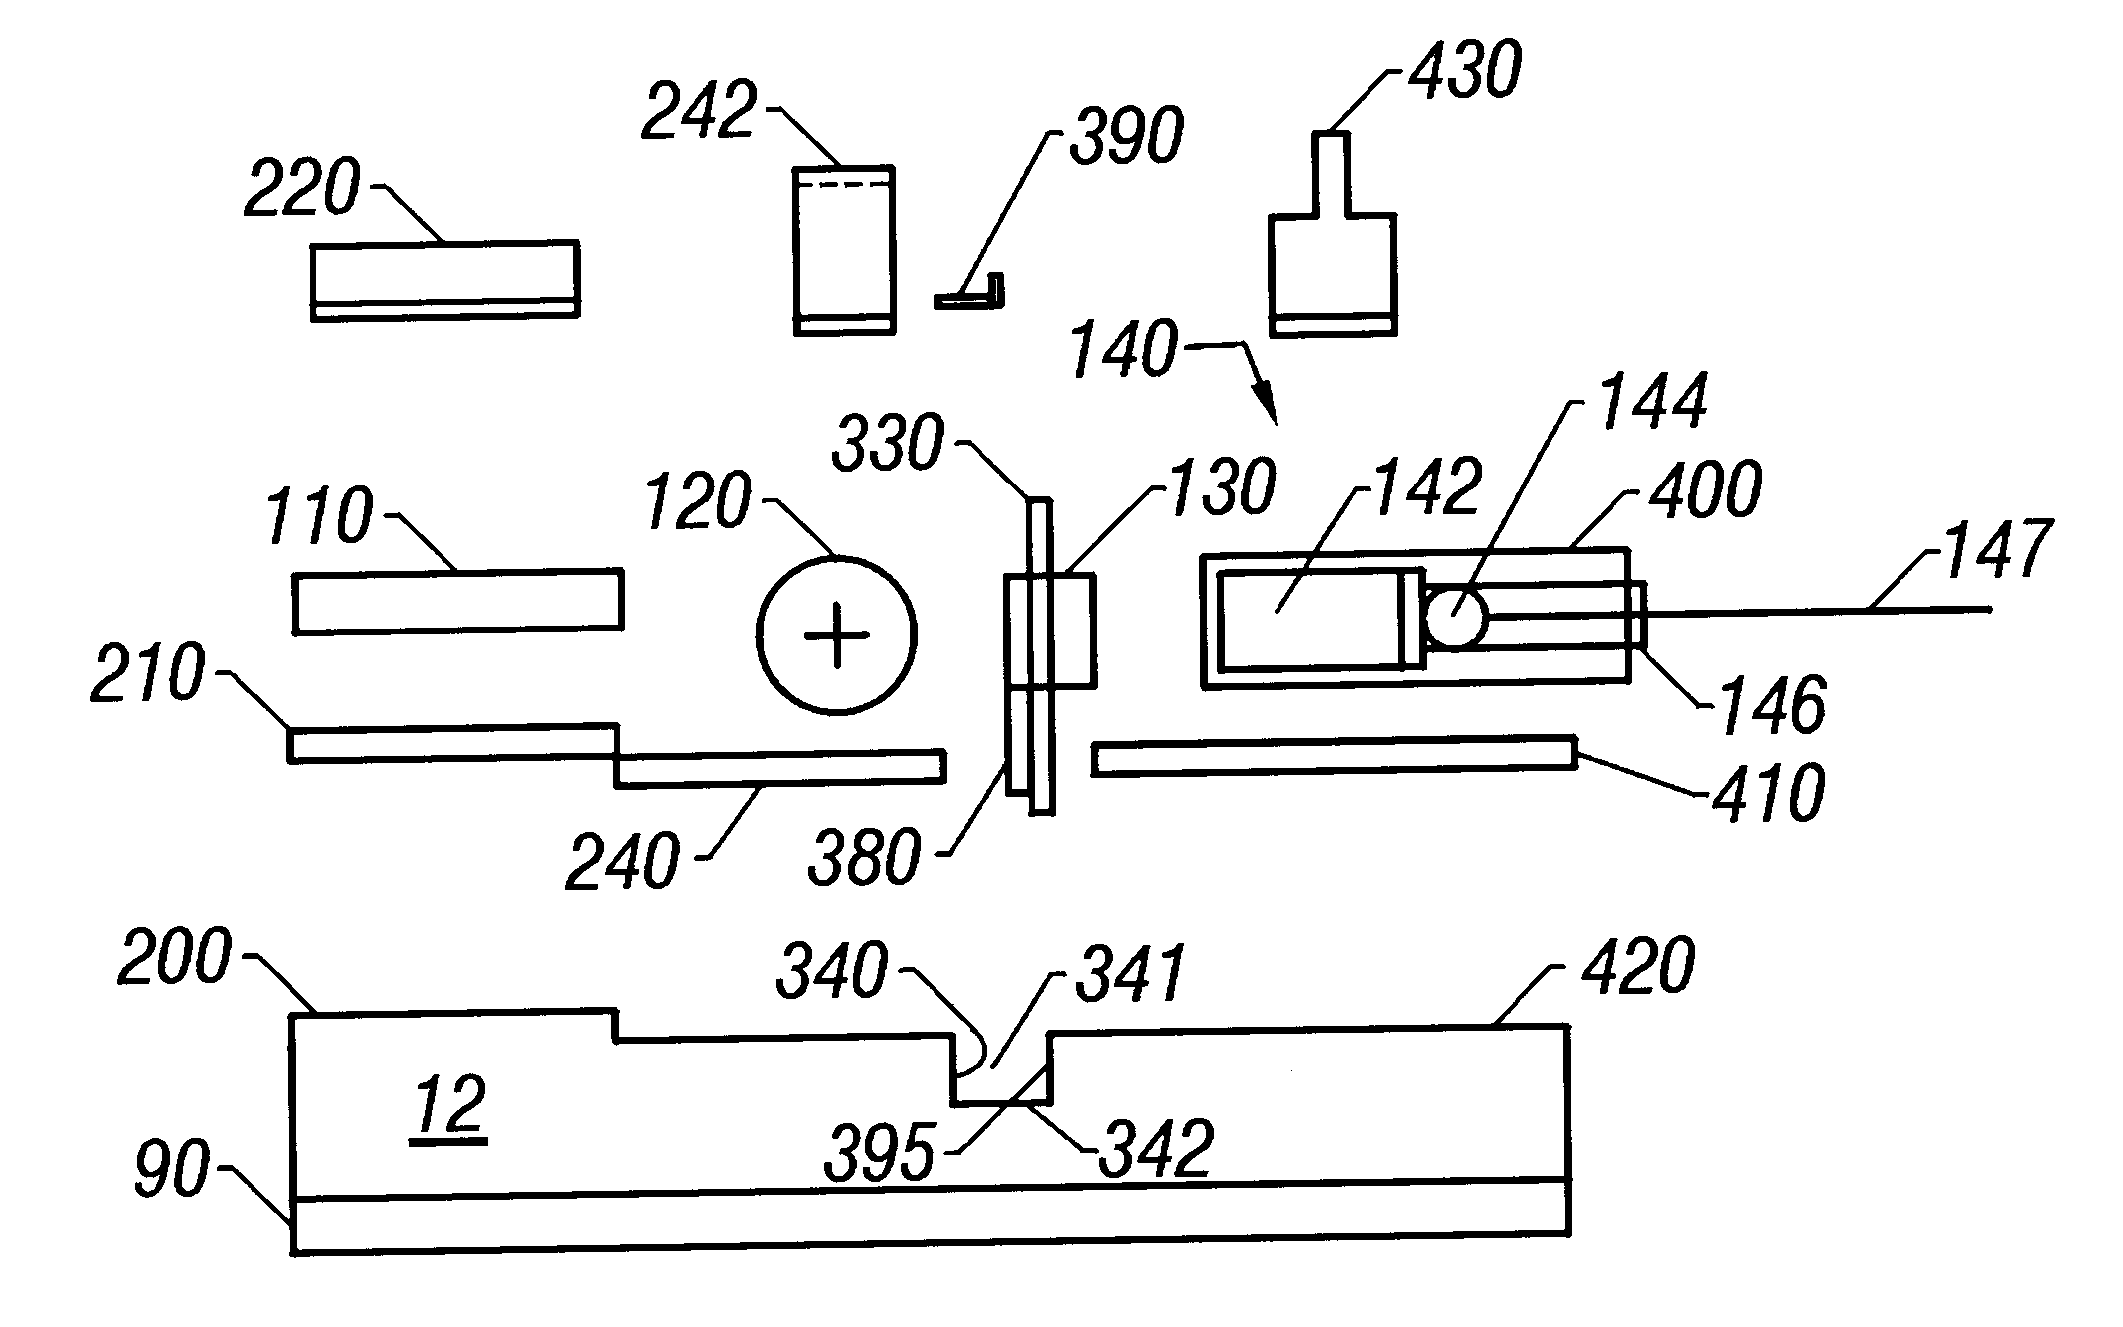 Laser assembly platform with silicon base